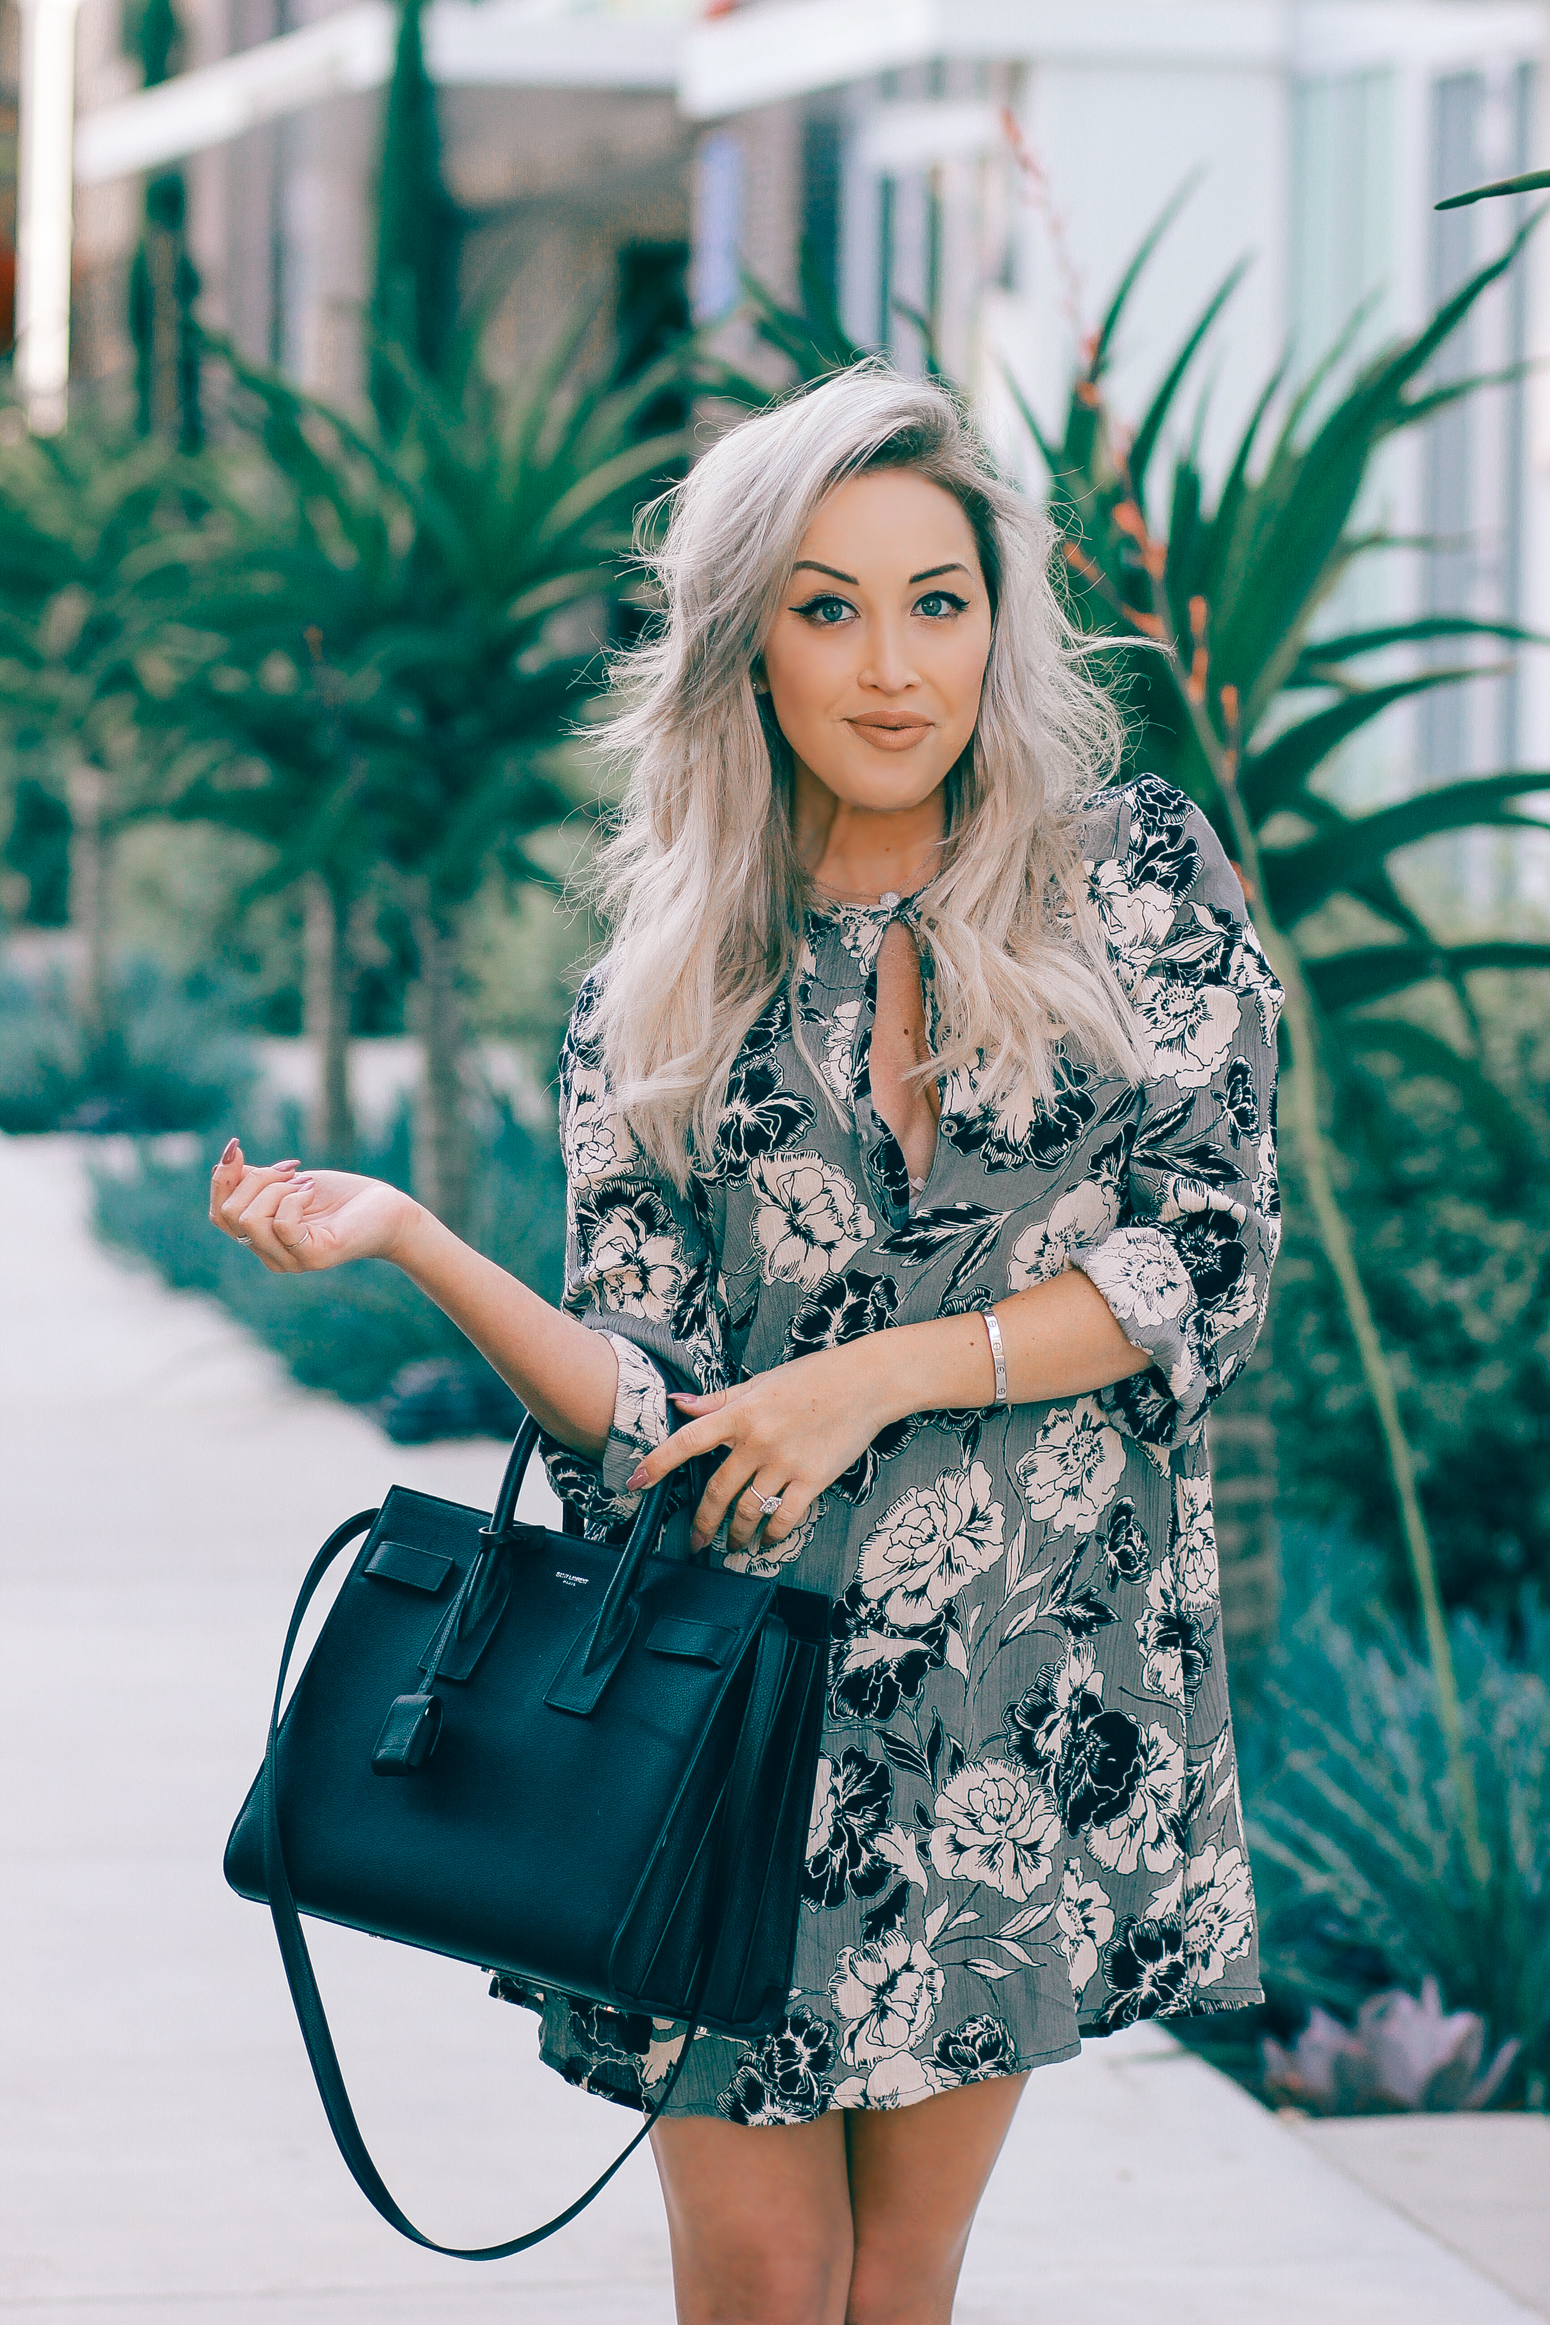 Blondie in the City | Vintage Rose Dress @shopather | YSL Bag